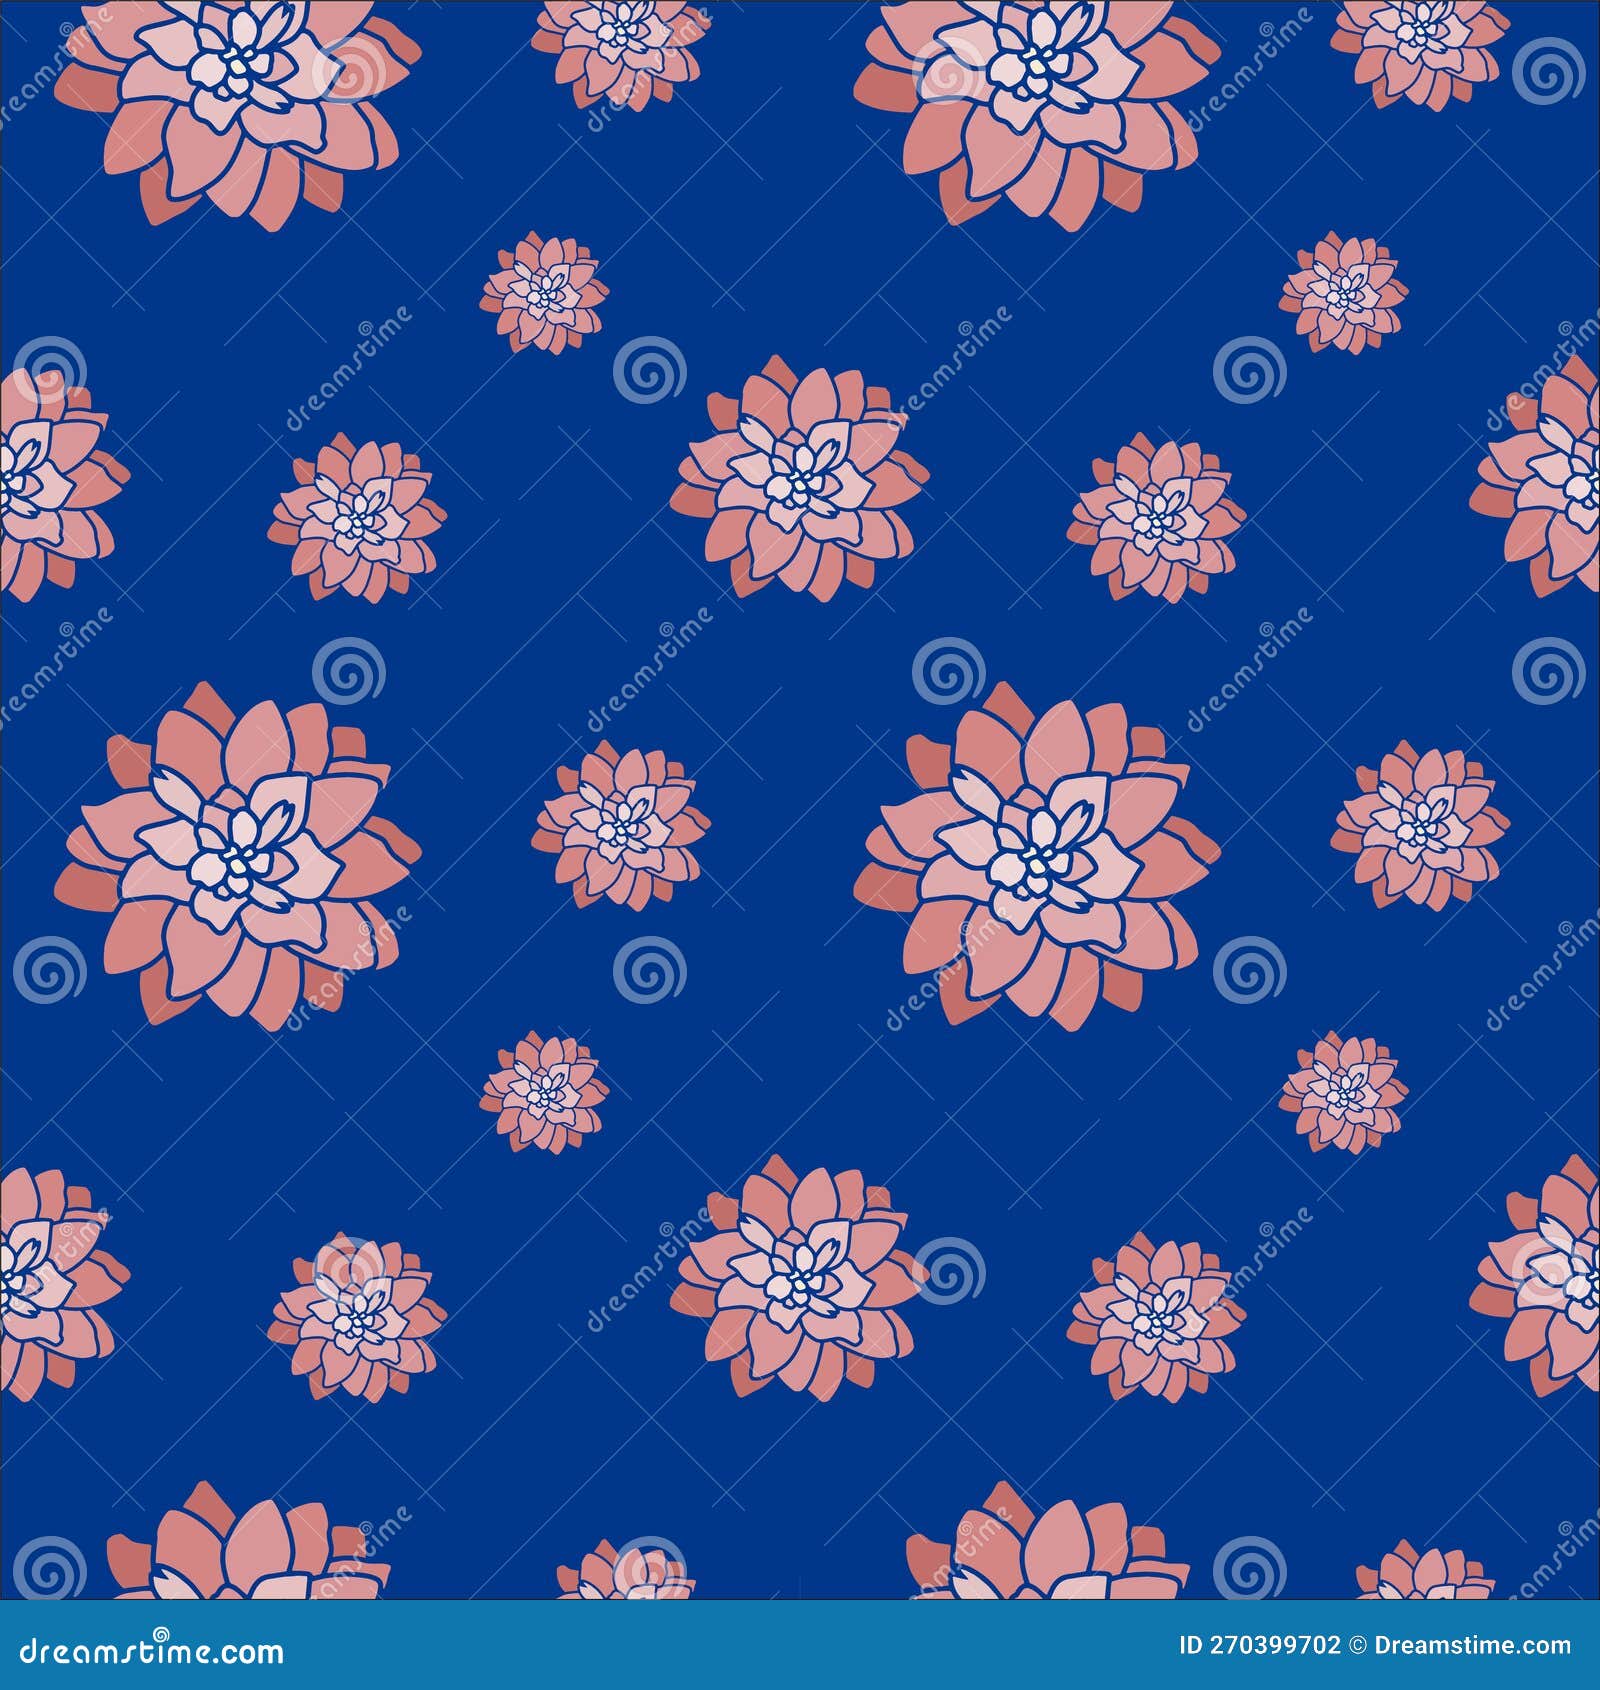 pattern of pink flowers with blue color